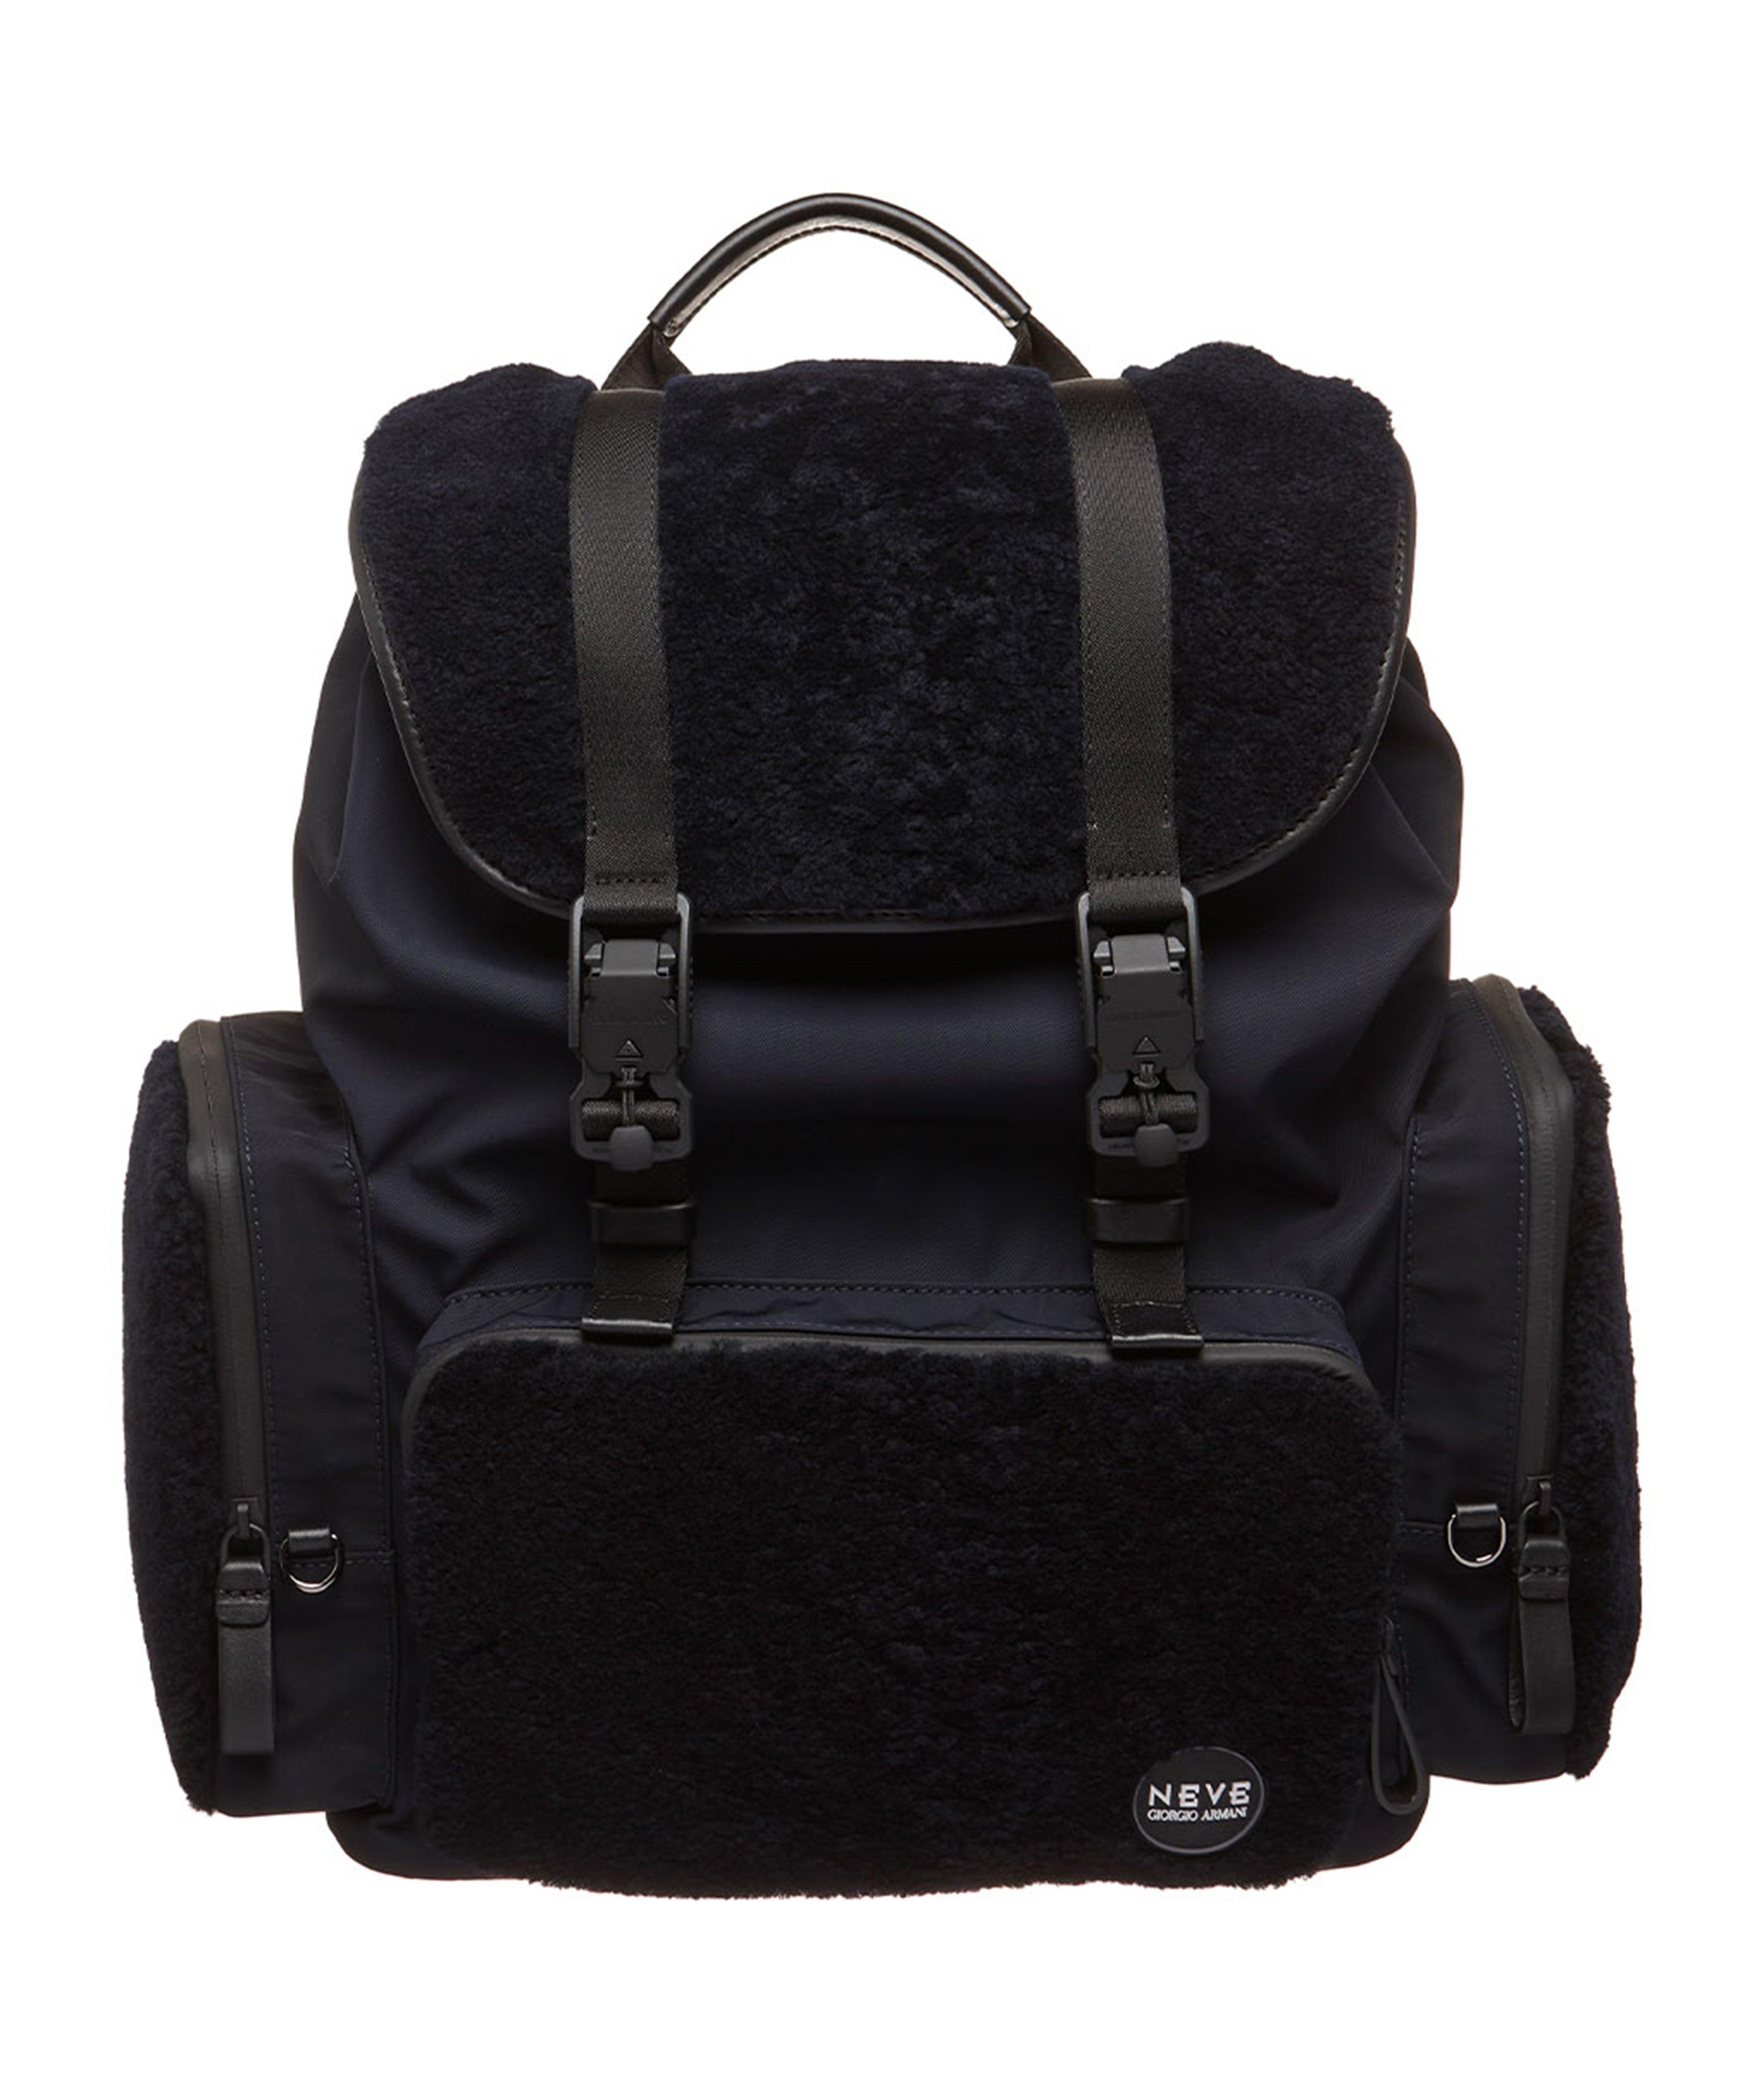 Neve Technical Nylon and Shearling Backpack image 0